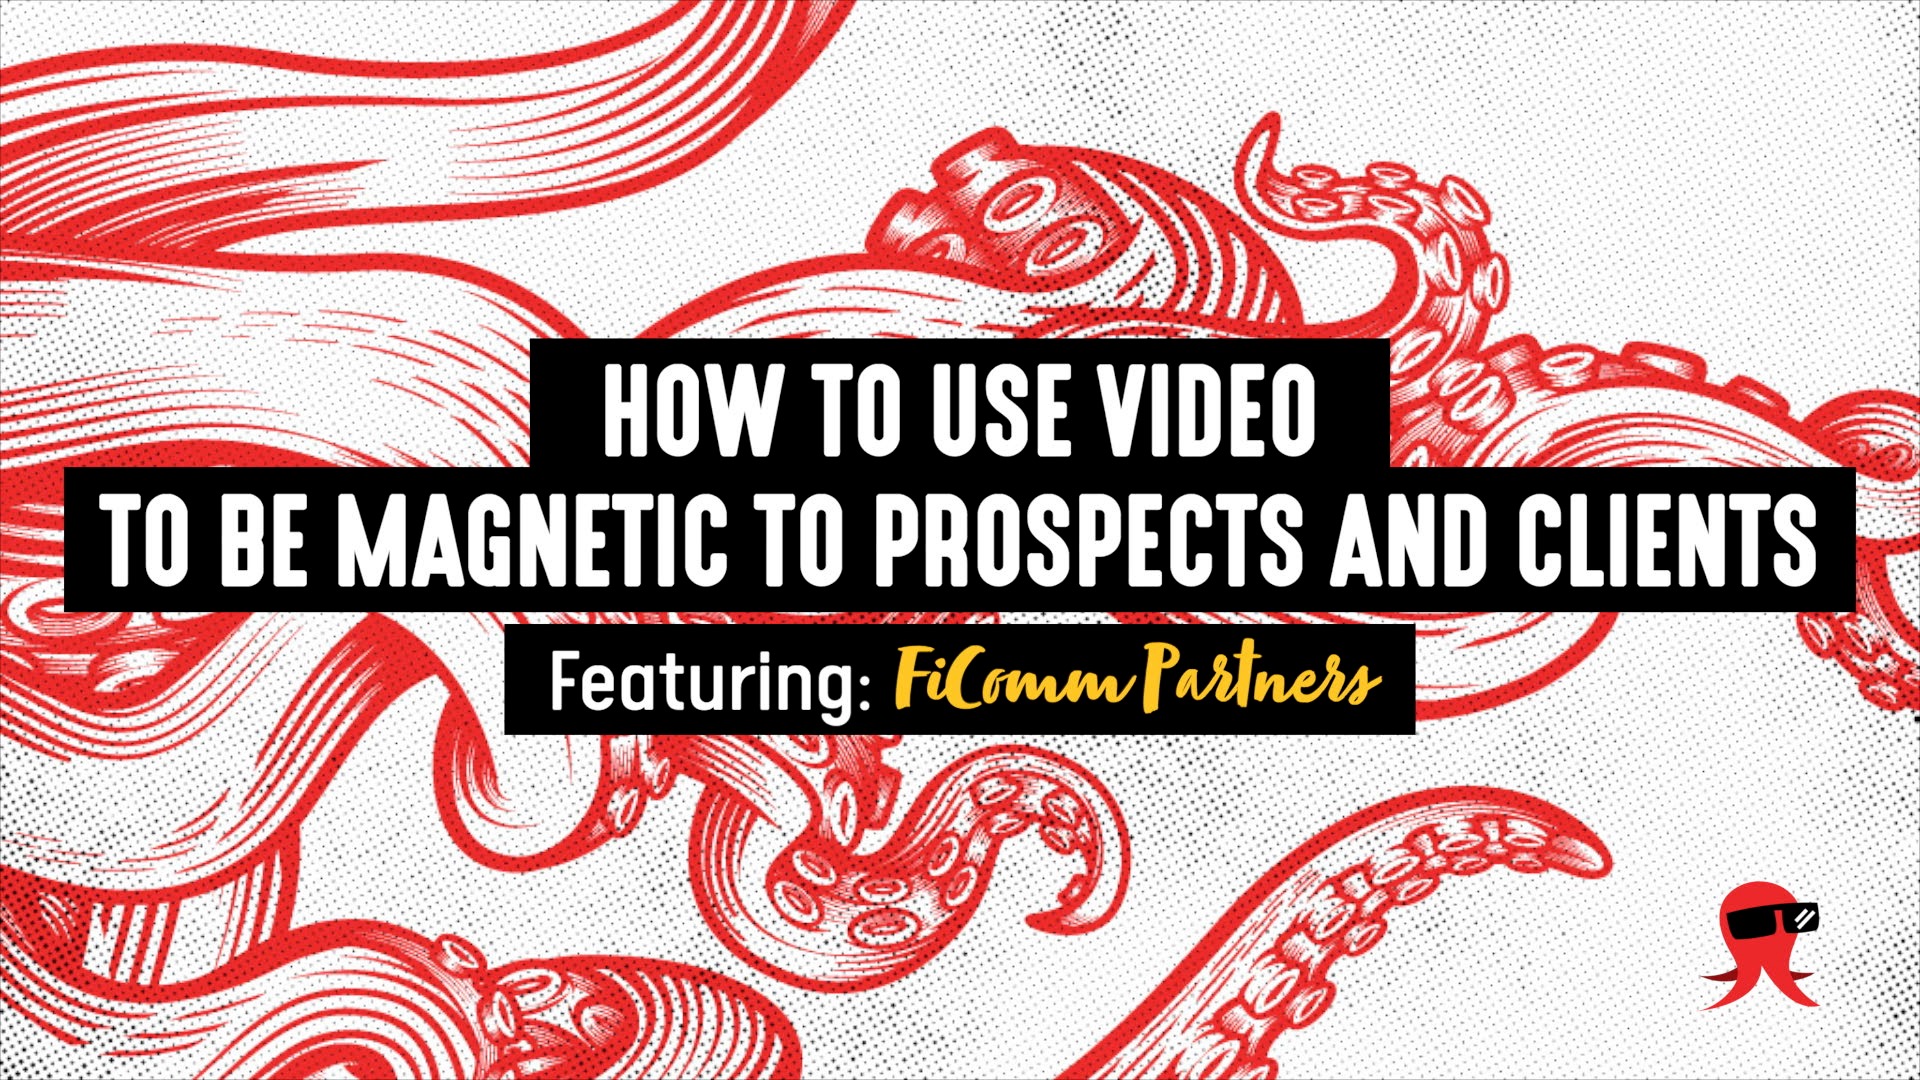 How to Use Video to Be Magnetic to Prospects and Clients